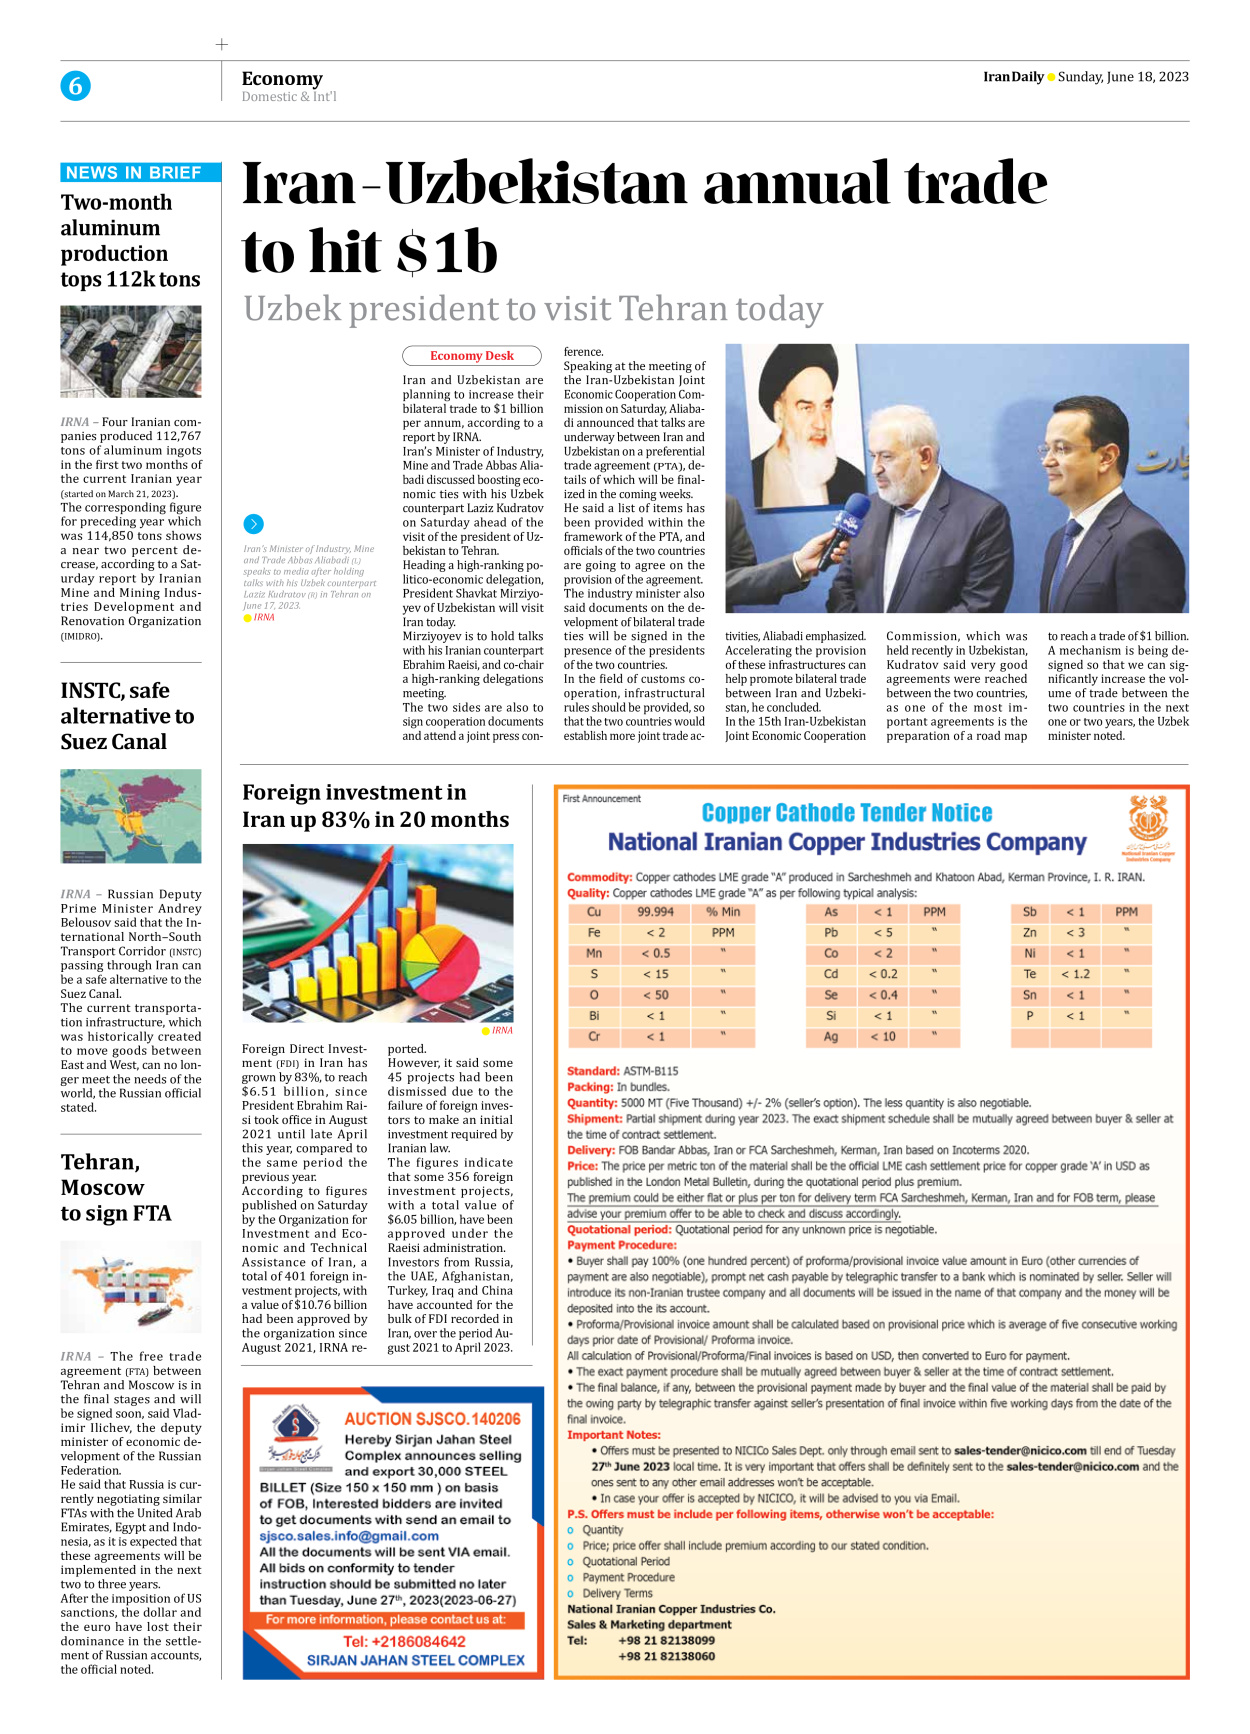 Iran Daily - Number Seven Thousand Three Hundred and Seventeen - 18 June 2023 - Page 6